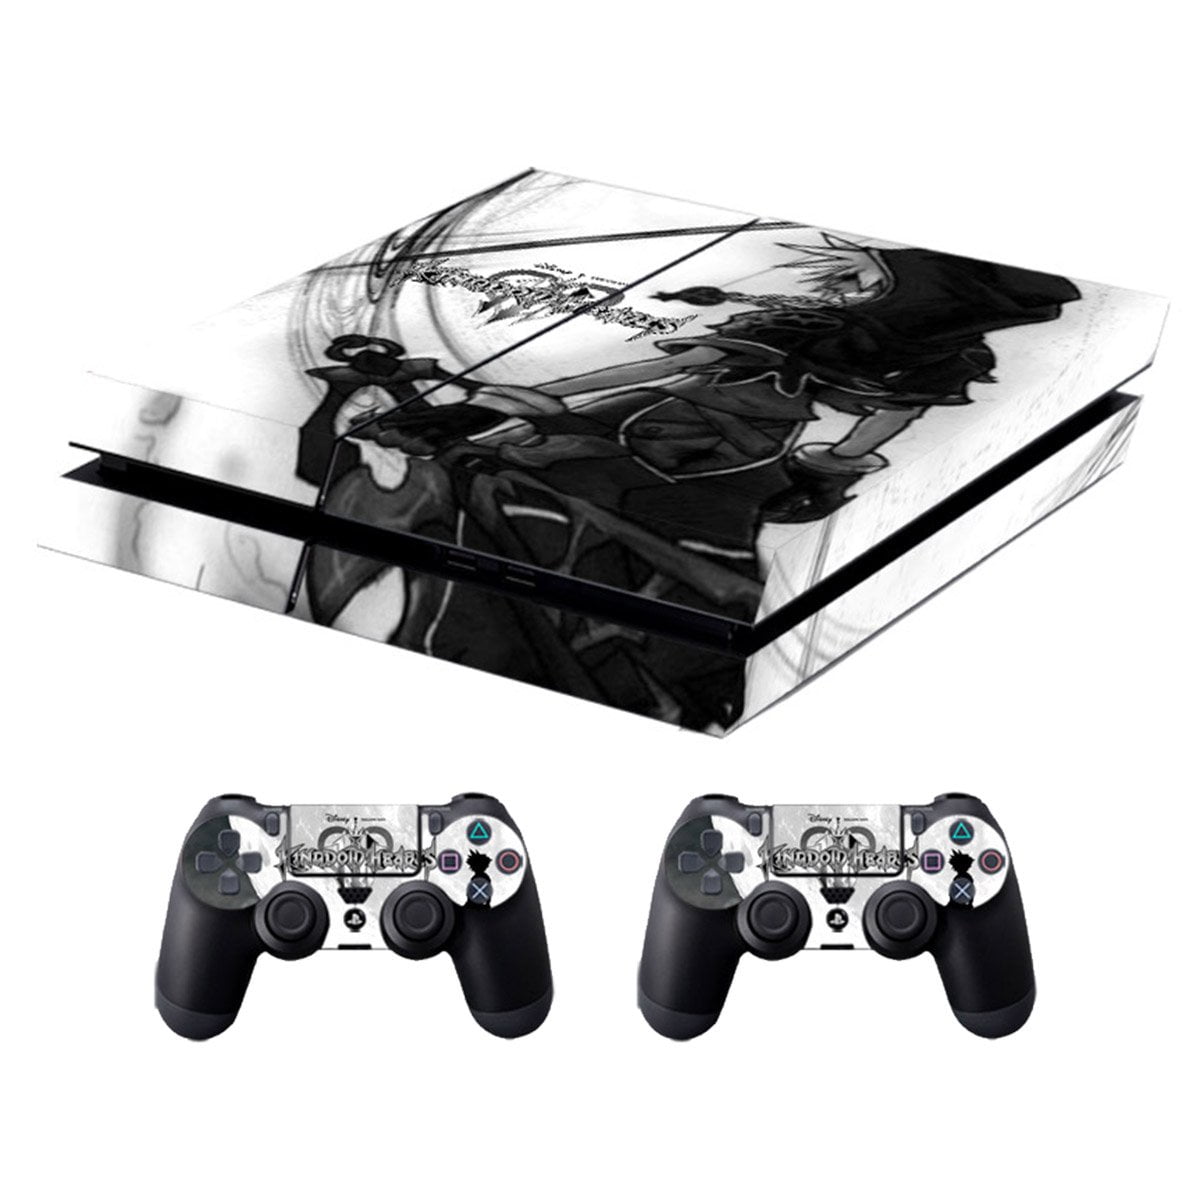 GameXcel Vinyl Decal Protective Skin Cover Sticker vinilo Calcomanía for Sony PS4 Console 2 Dualshock Controllers Hearts - Walmart.com